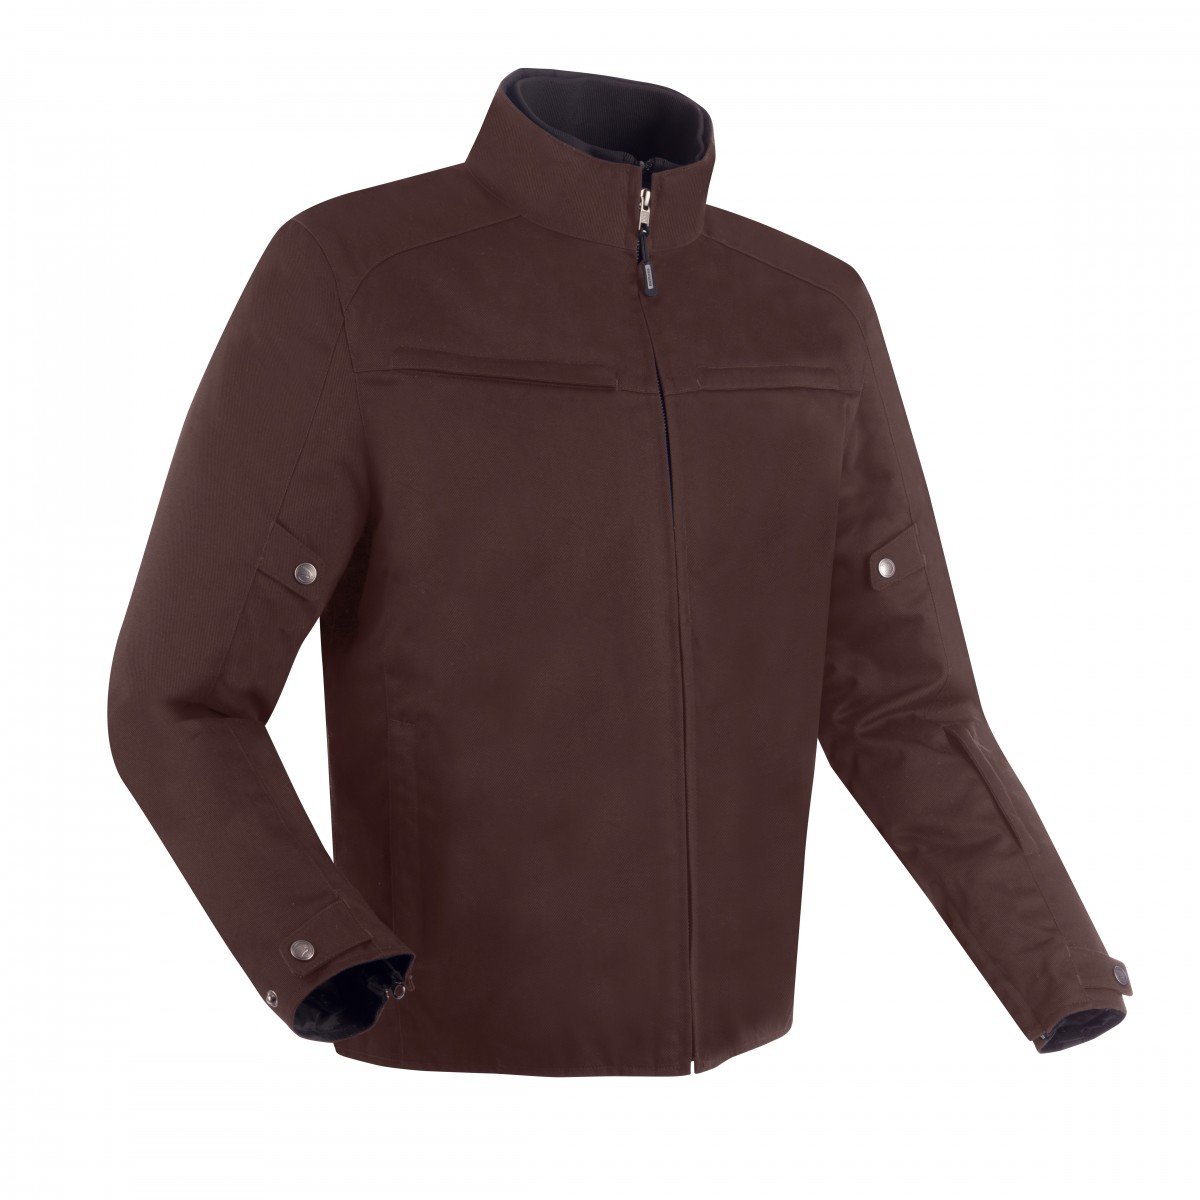 Image of Bering Cruiser Jacket Brown Size XL ID 3660815169285